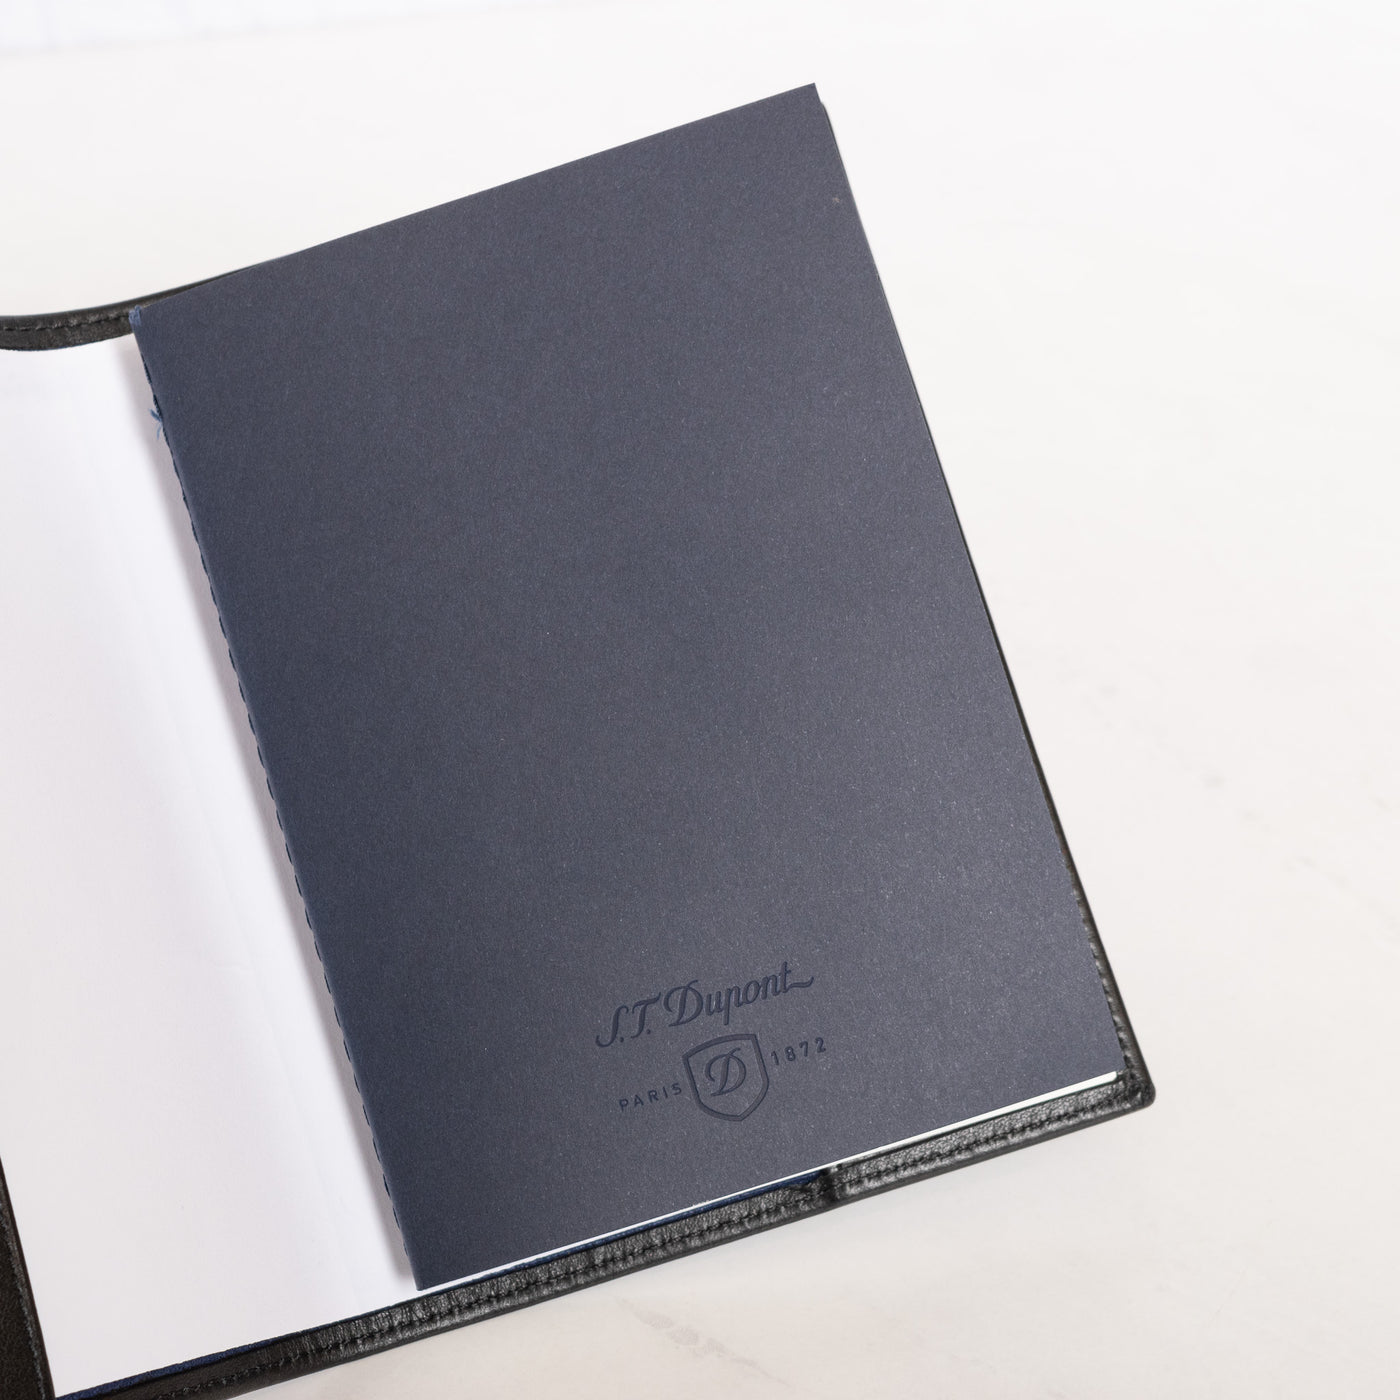 ST Dupont Picasso Special Edition Notebook inside stamp